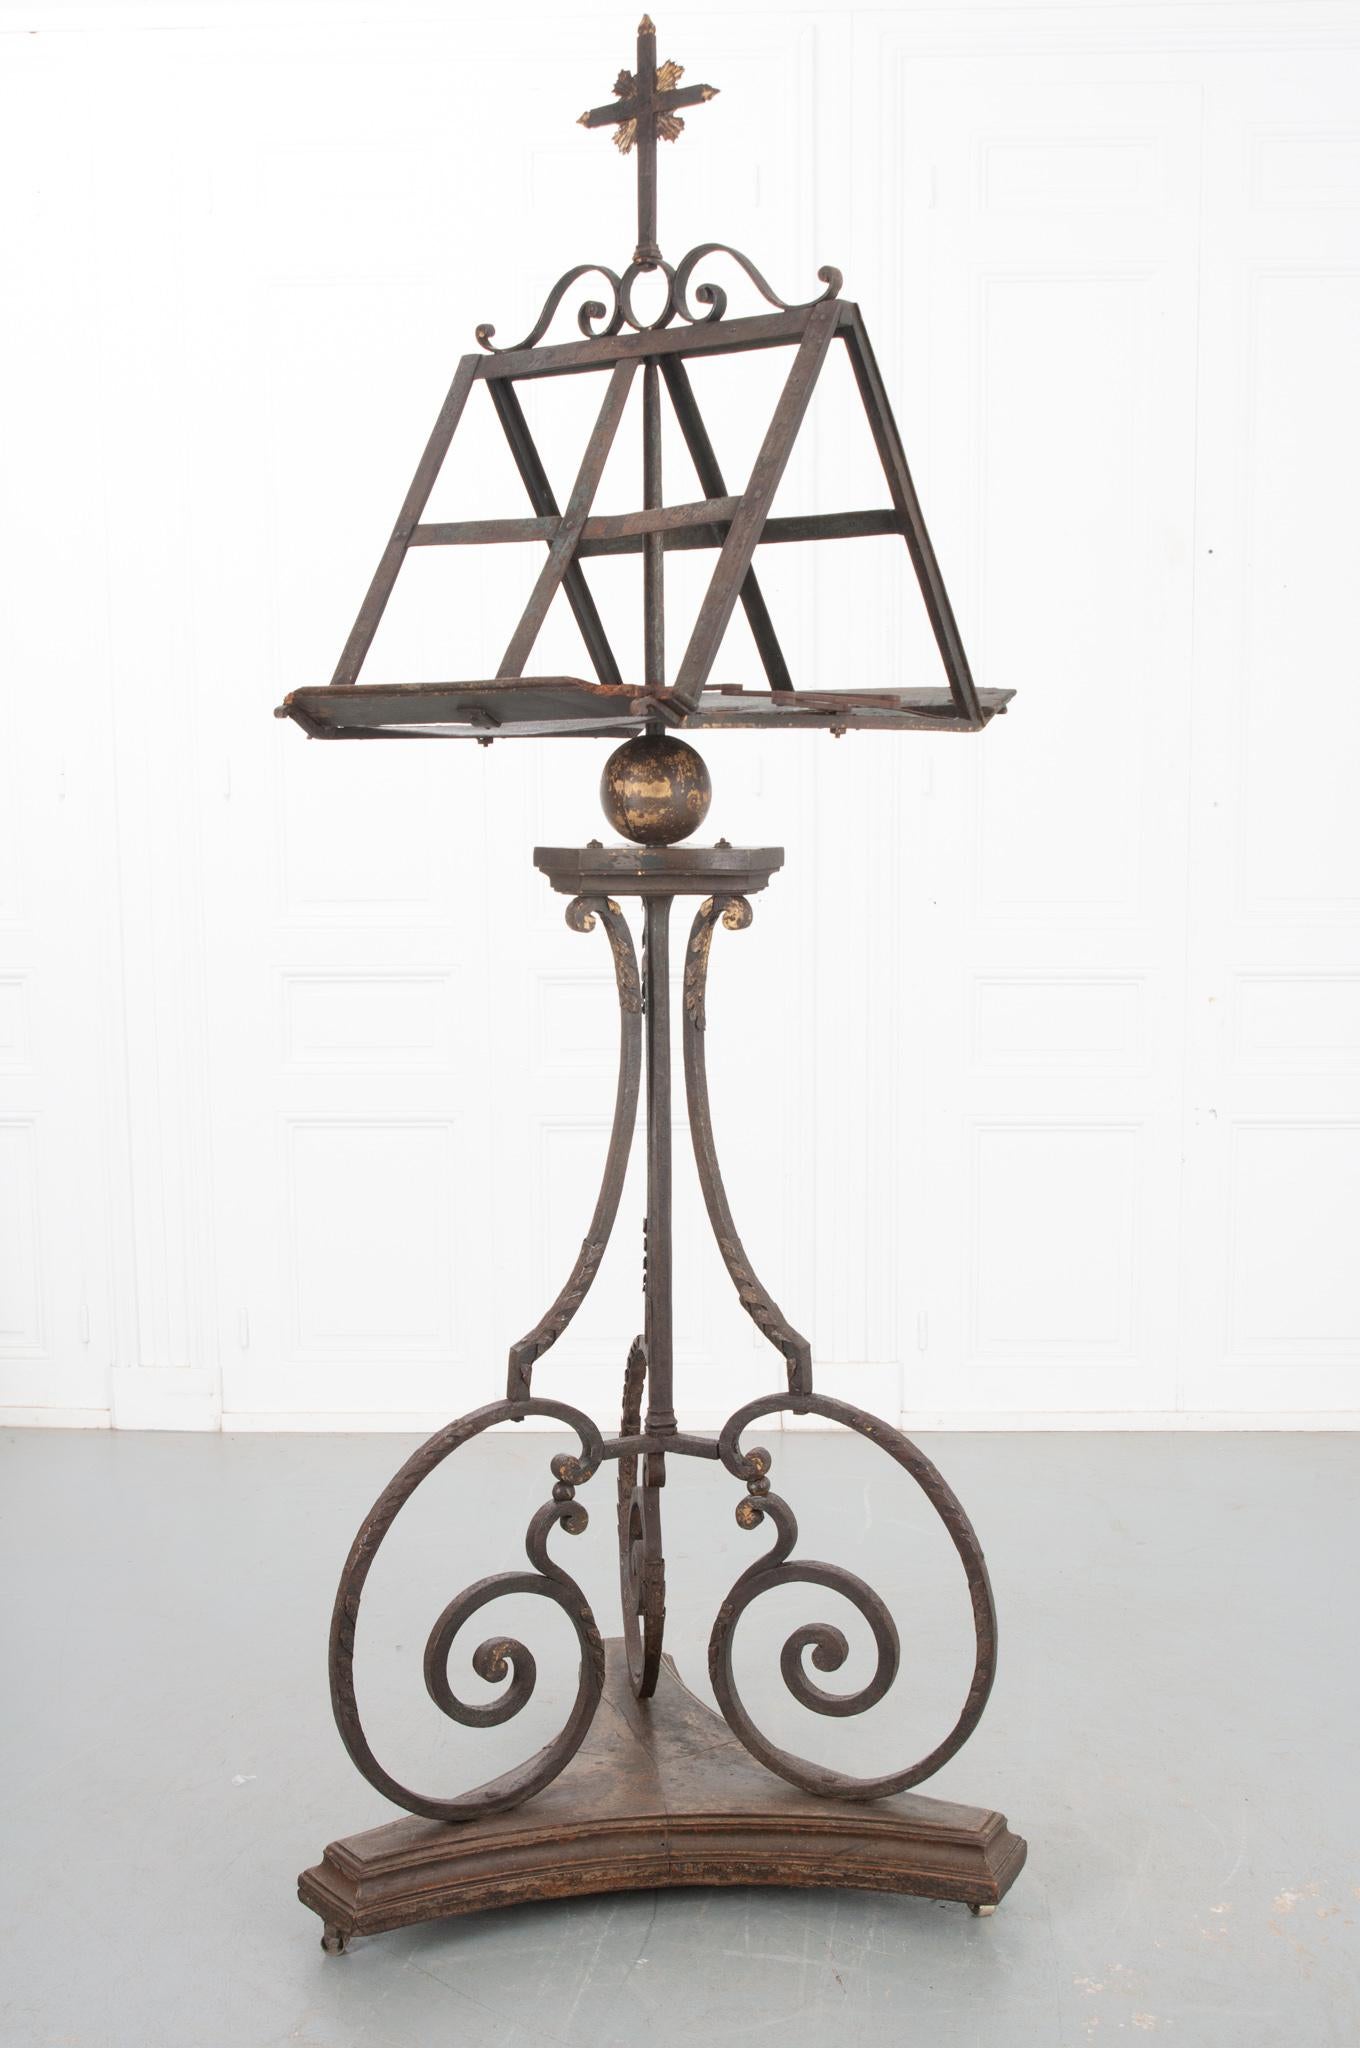 A stunning 18th century iron lectern from France. This would have been used on the altar to display a large bible during mass for the priest to read from. This is an instant conversation starter in any space because of its great height at over seven